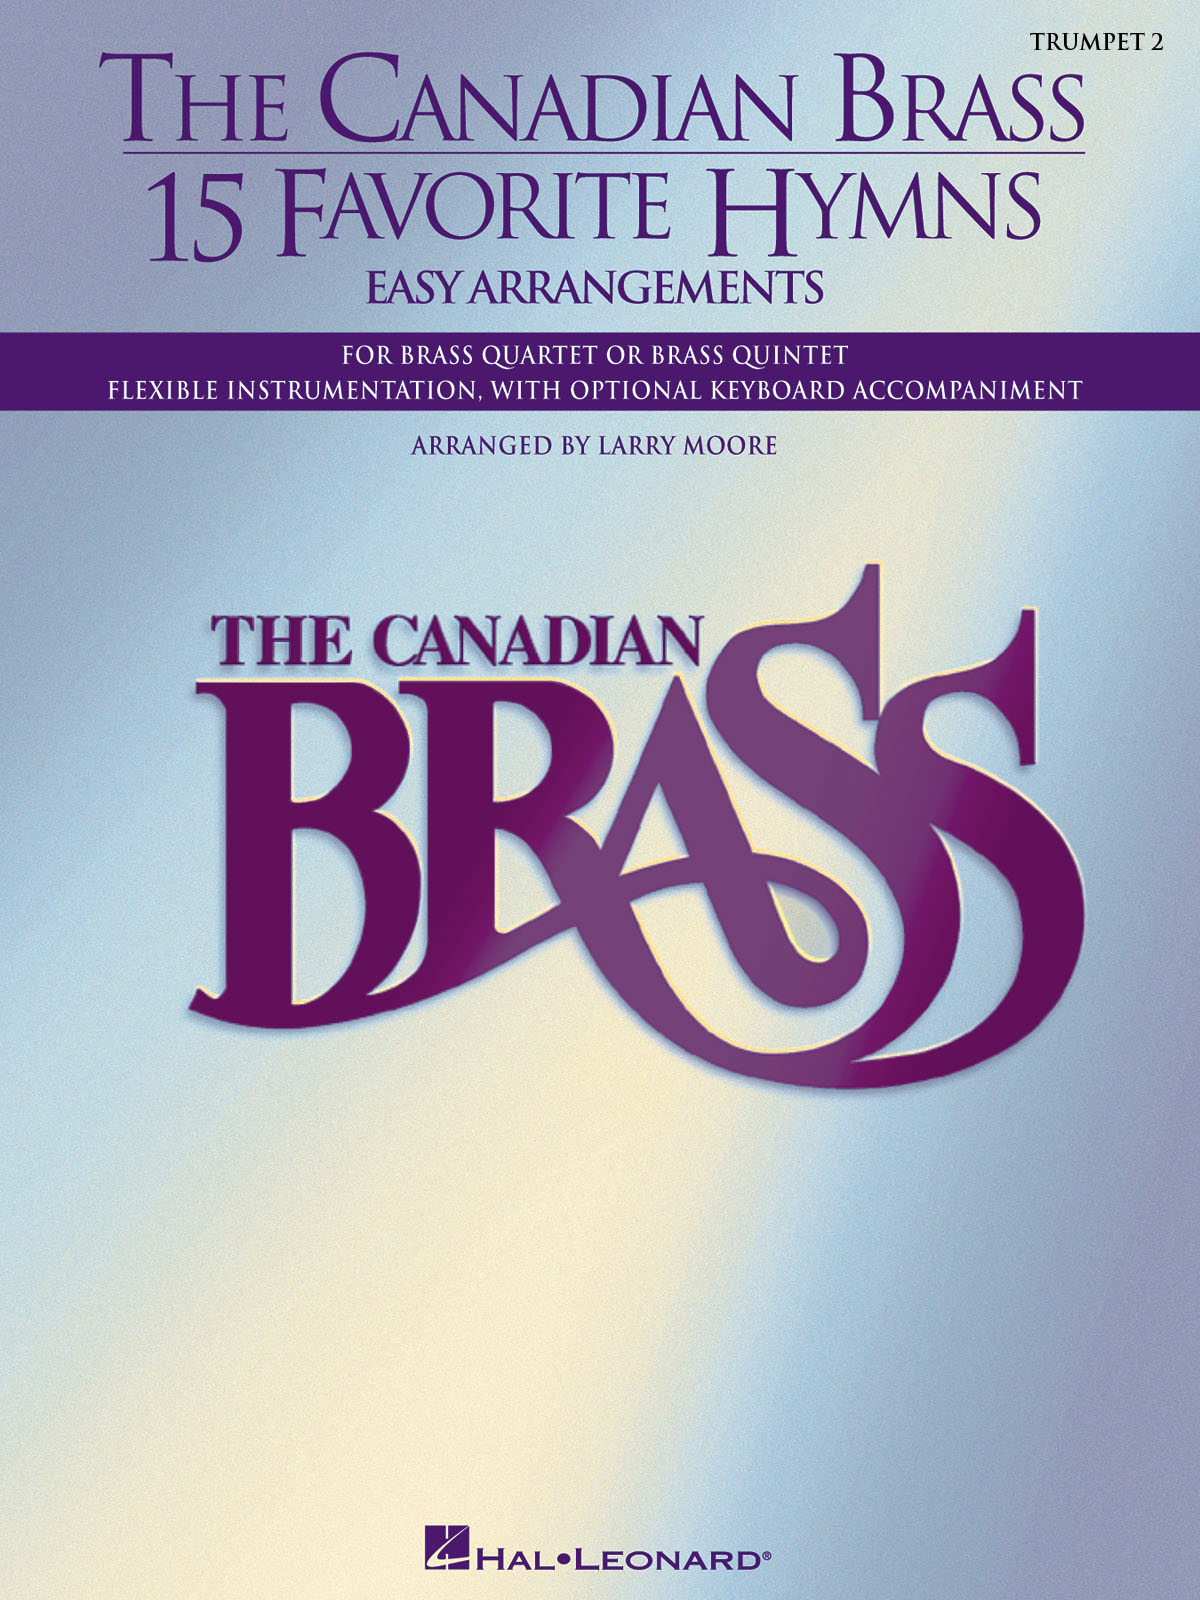 The Canadian Brass 15 Favorite Hymns Trompet 2